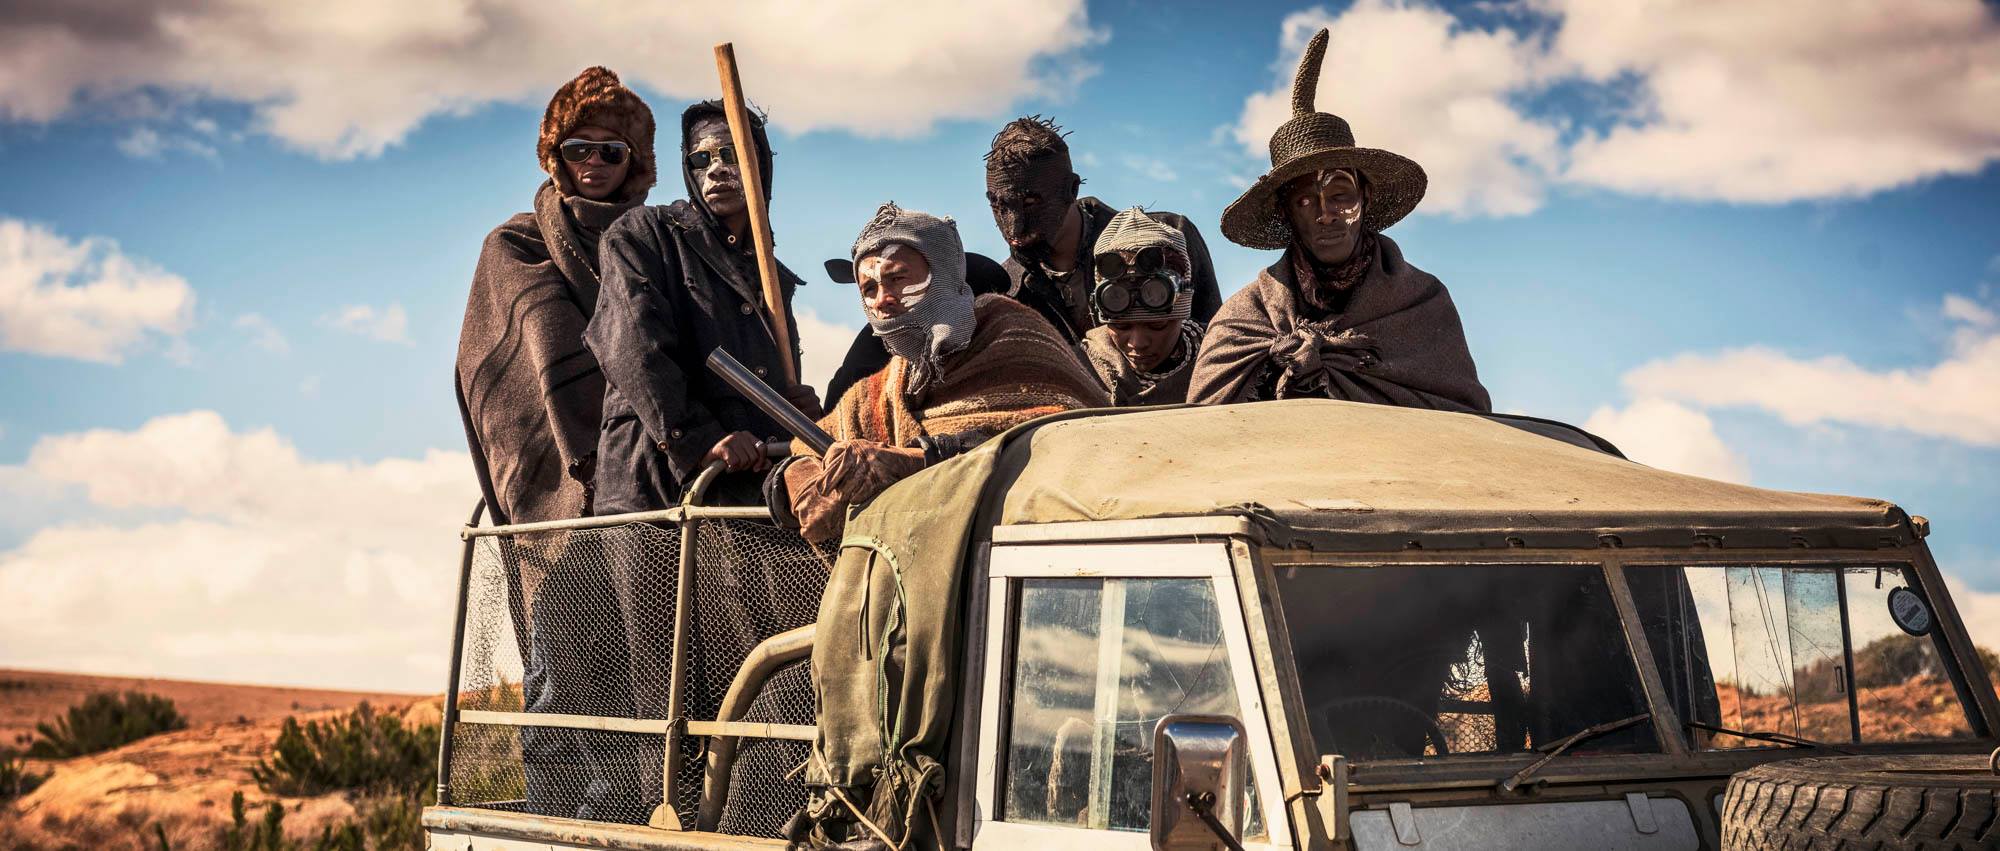 Five Fingers For Marseilles Wallpapers